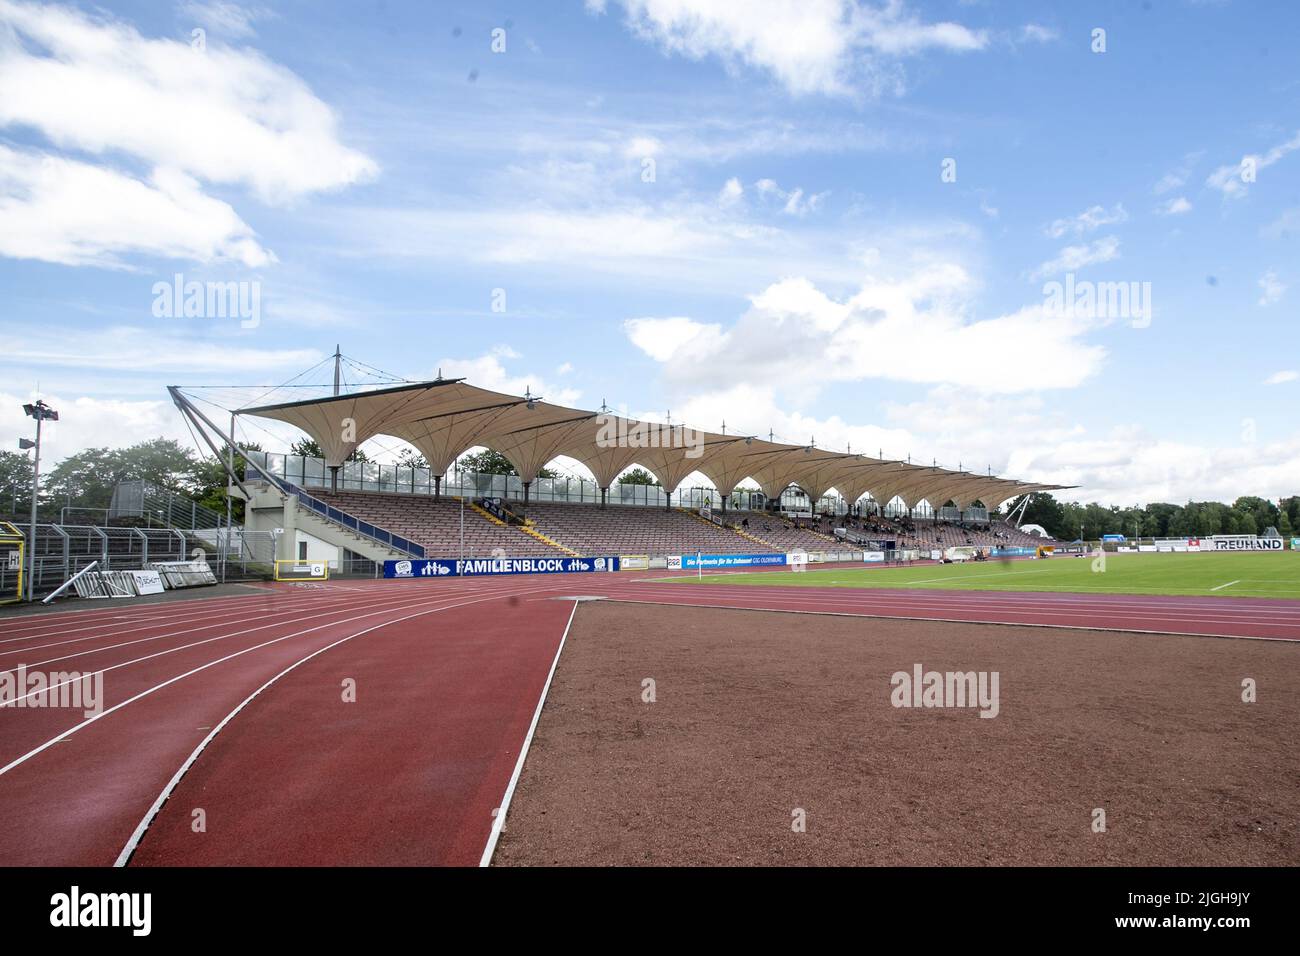 OLDENBURG, Marschwegstadion, 09-07-2022 , season 2022 / 2023 , Friendly match. during the match Oldenburg - Go Ahead Eagles, stadium overview (Photo by Pro Shots/Sipa USA) *** World Rights Except Austria and The Netherlands *** Stock Photo